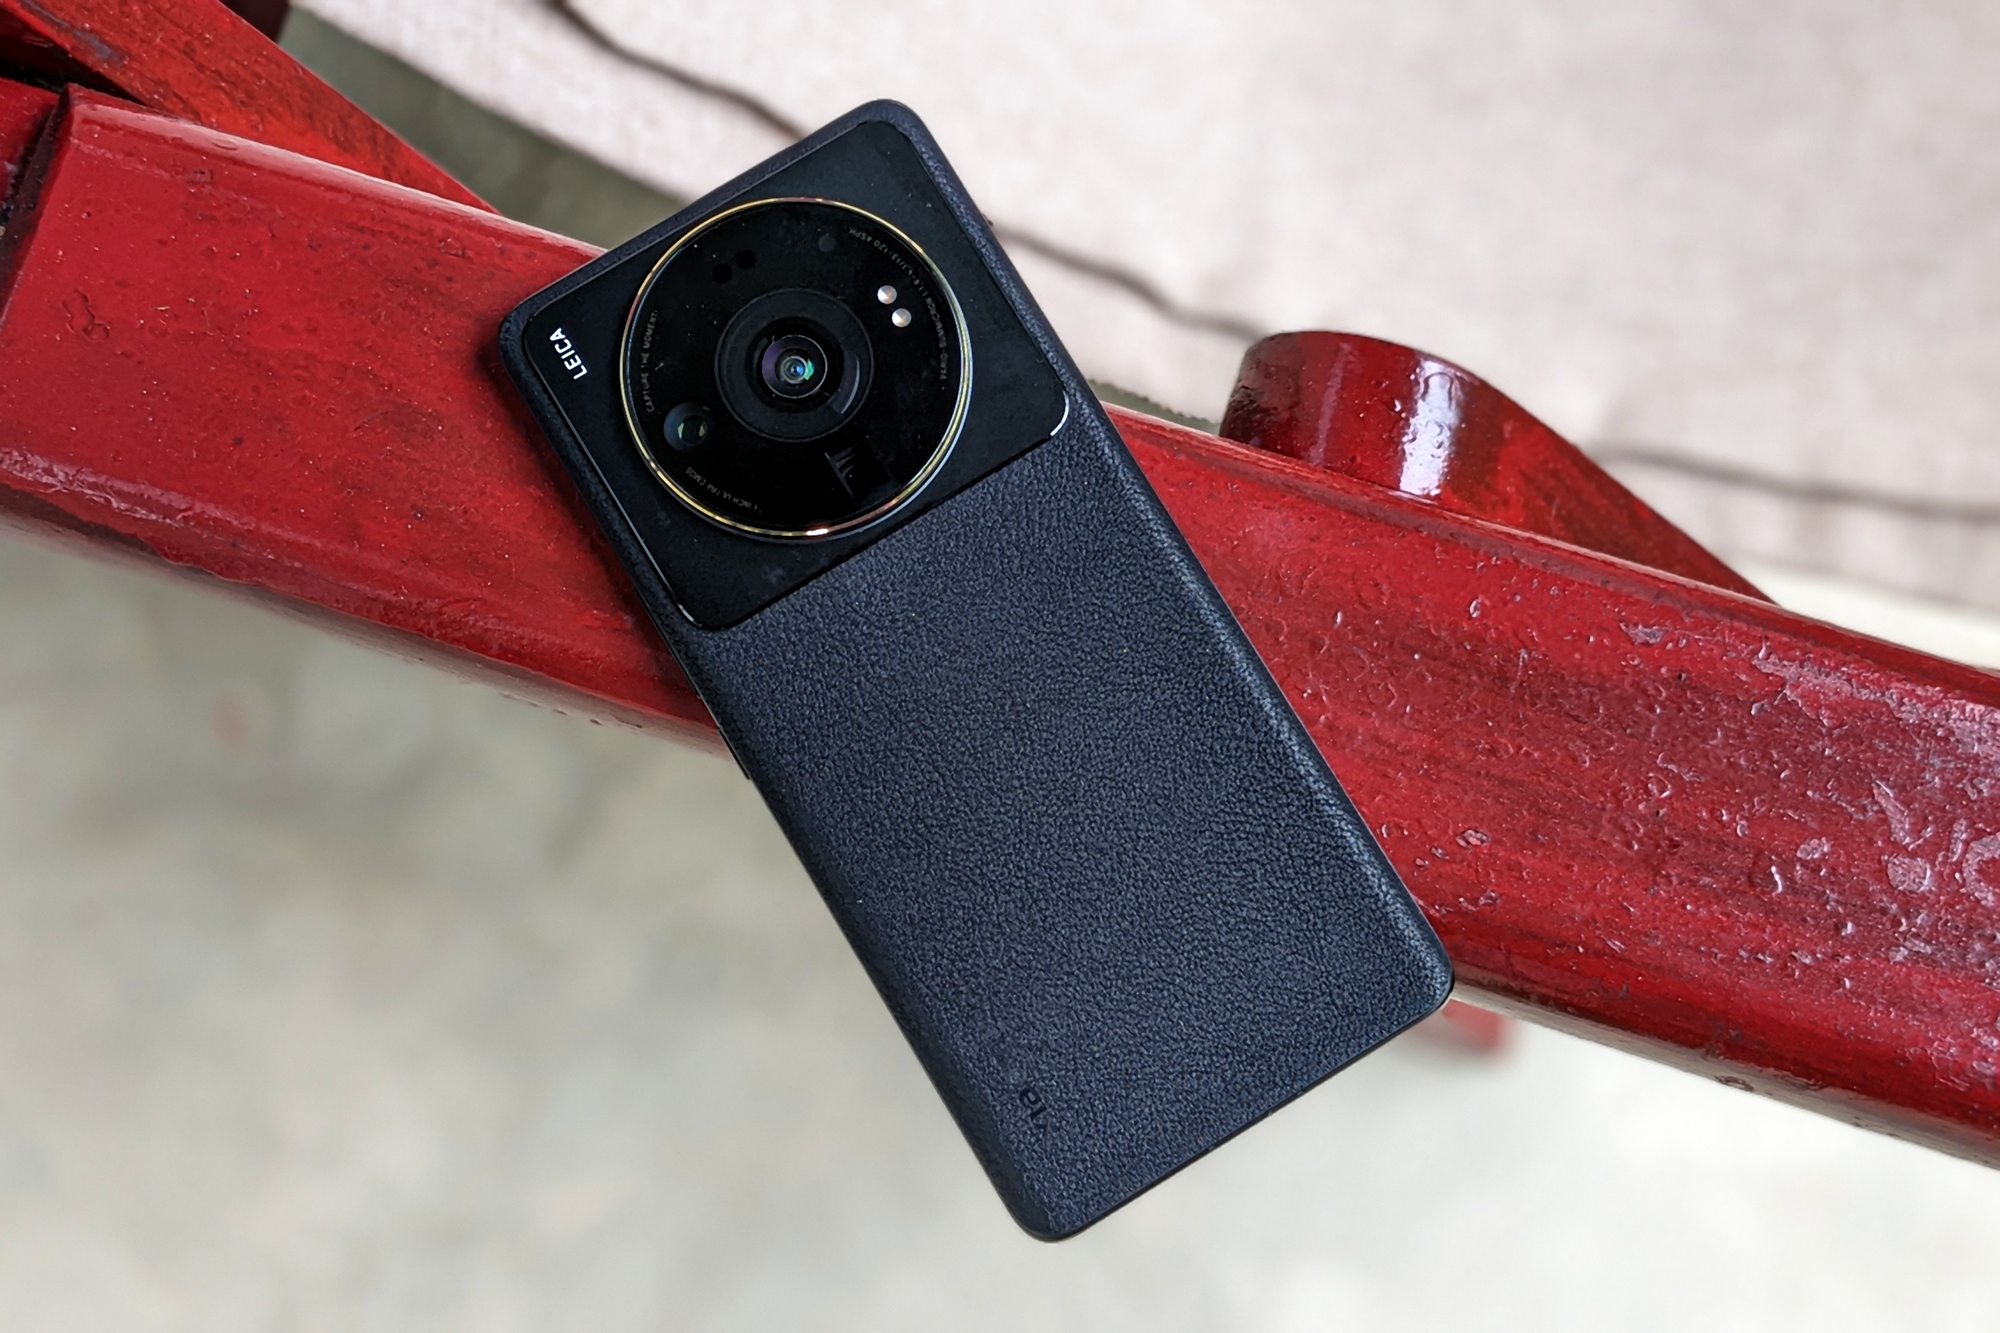 Xiaomi 12S Ultra Unboxing And First Look: Leica Partnership Brings